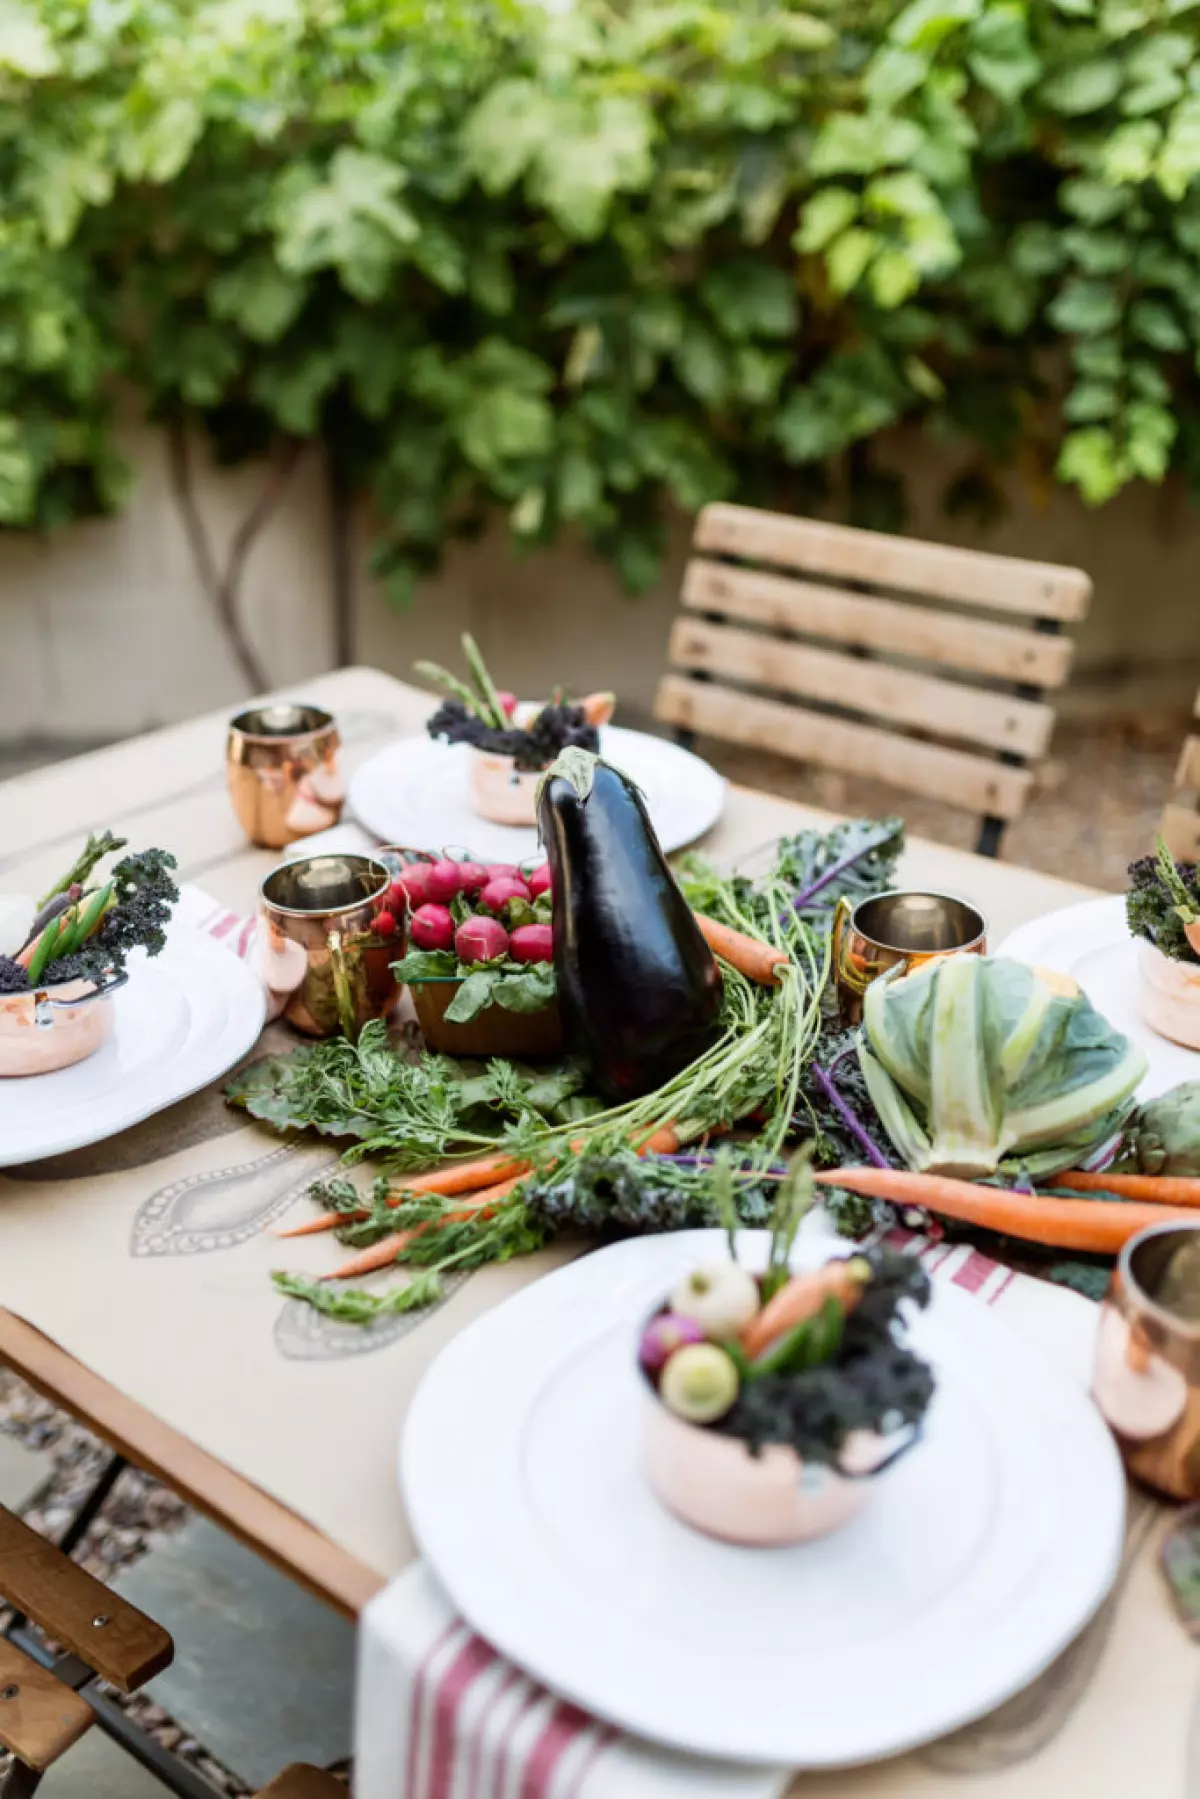 What could be better than a harvest dinner to ring in the Fall season?